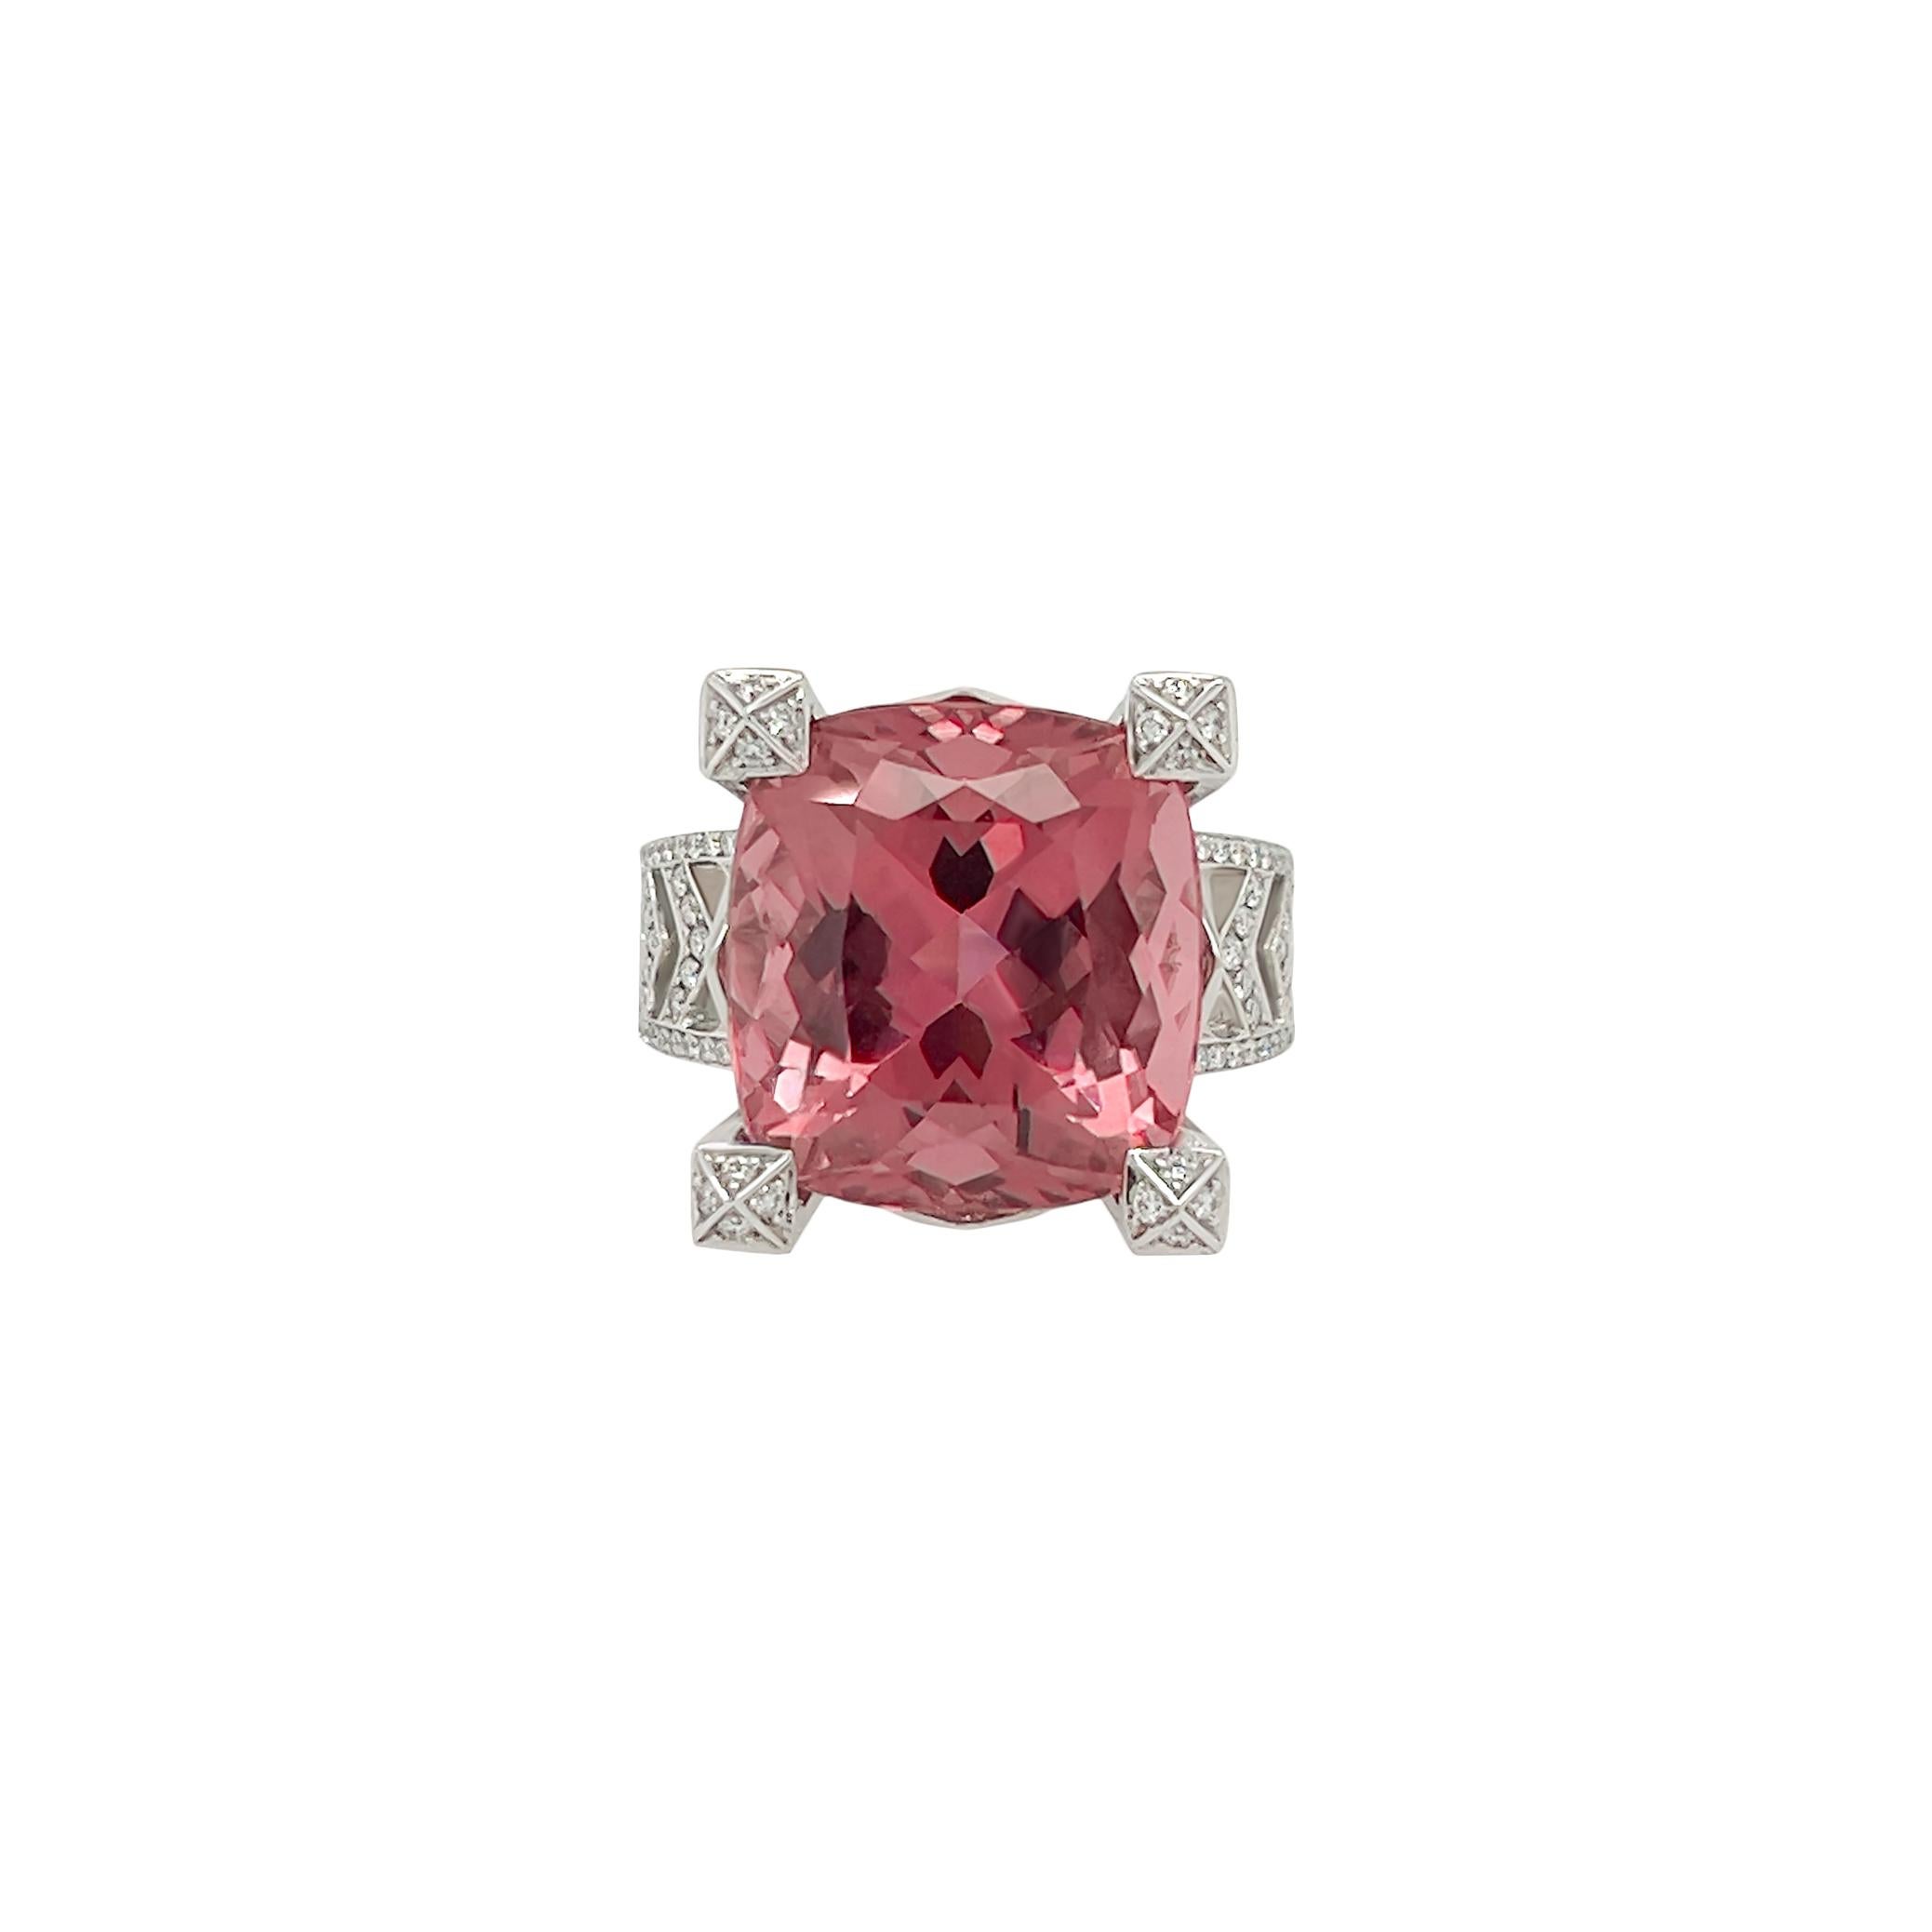 This stunning 13.77 carat natural pink tourmaline is the highlight of this ring. The modern design showcases the centre stone's beauty with simply decorating it with nearly 1 carat of vvs pave’d diamonds in a chevron design. The center stone is